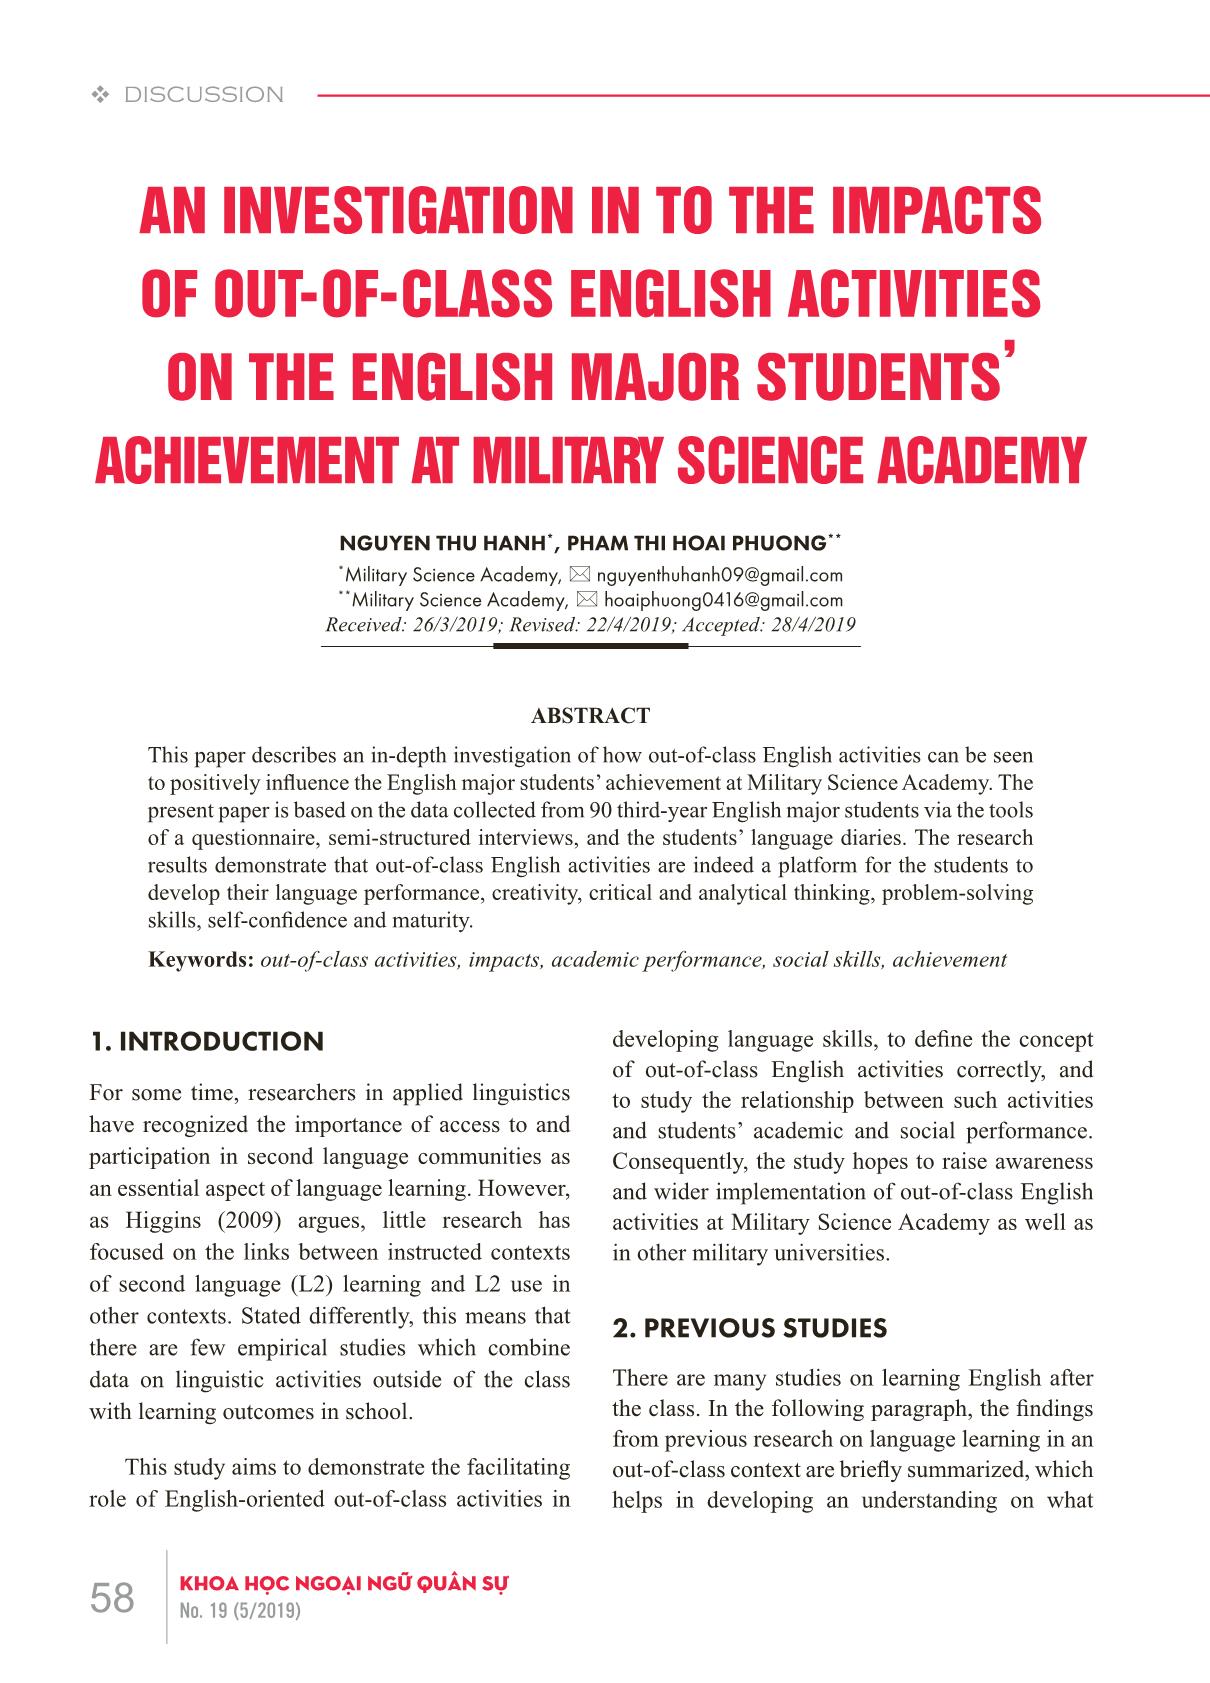 An investigation in to the impacts of out-of-class English activities on the English major students’ achievement at military science academy trang 1